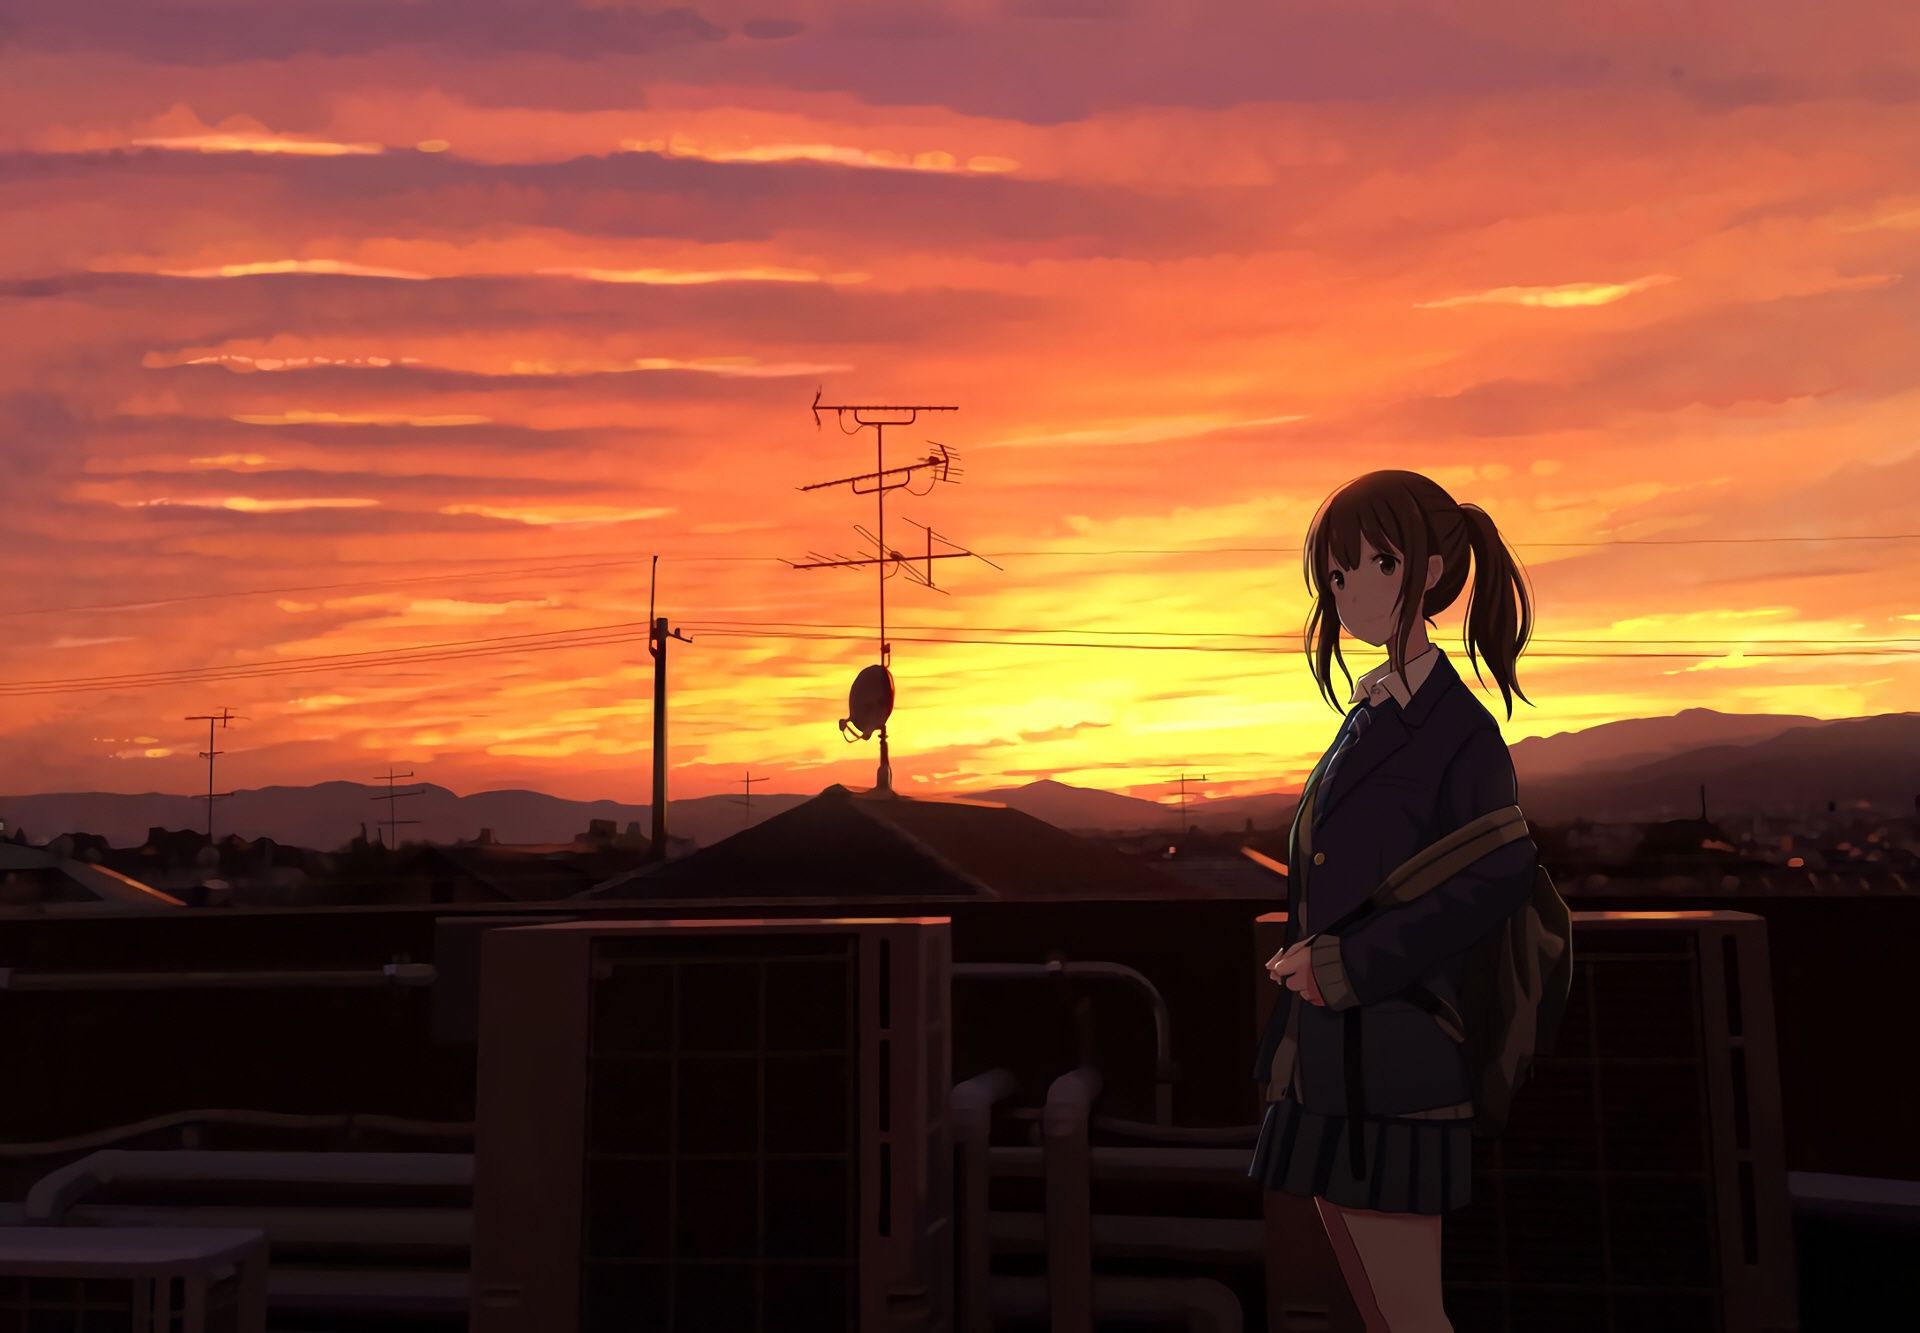 Download wallpaper the sky, sunset, girl, section art in resolution 1920x1333